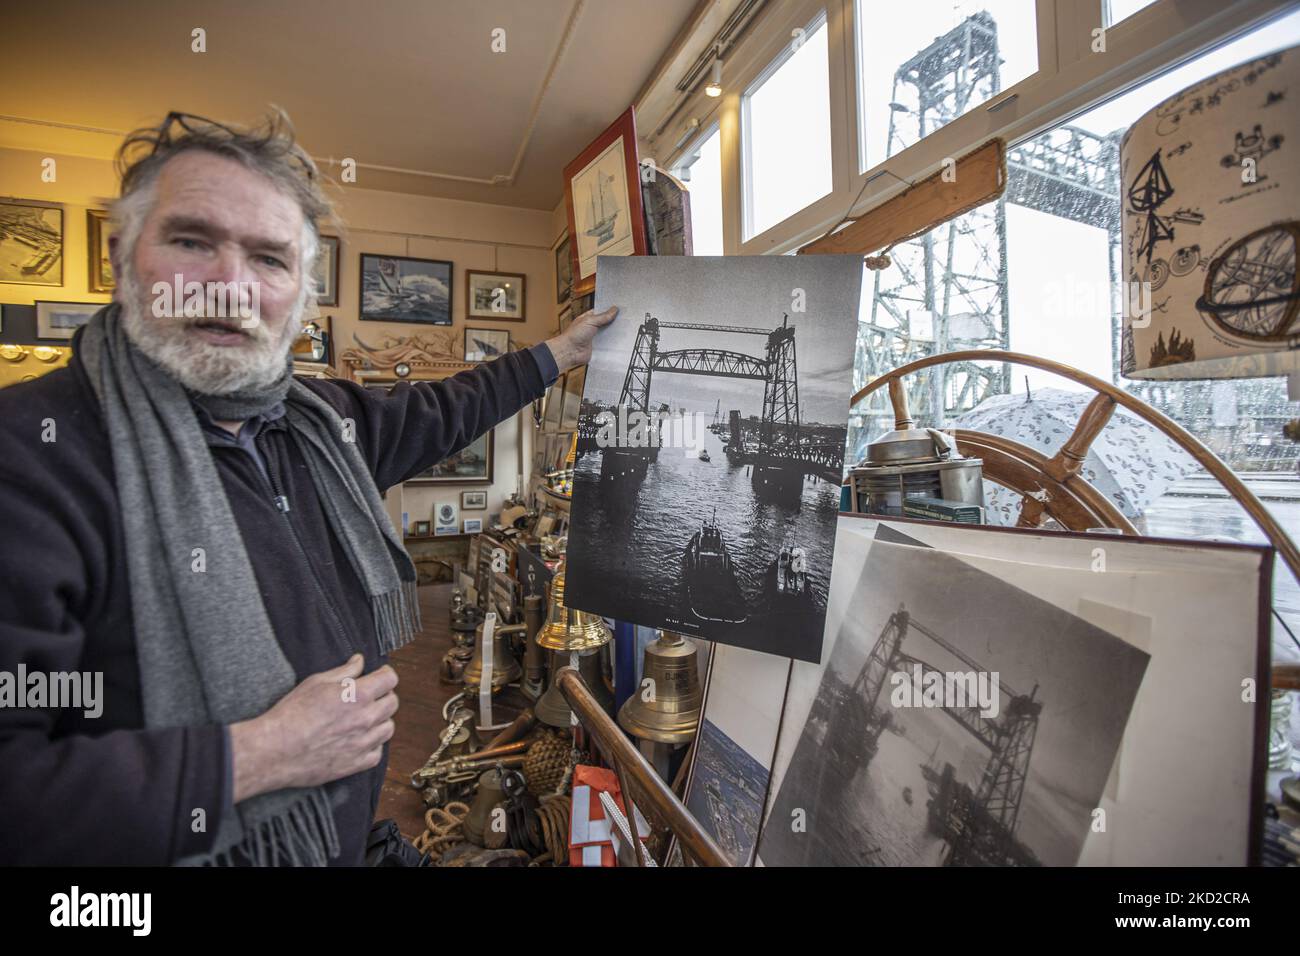 Shopkeeper of a Nautical store near the bridge Klaas Jan Hoeve is showing a historic old black and white picture of the bridge with the bridge been visible out. The iconic historic De Hef - Koningshavenbrug Bridge in the Dutch port city of Rotterdam may be dismantled for Jeff Bezos superyacht to pass under, as the mast of the sailboat exceeds the height of the bridge. The two-tower with swing lift bridge is an old level steel railroad bridge connecting the island, Noordereiland in the Maas river in the Southern part of Rotterdam. The bridge was built in 1877 and suffered damage during the 1940 Stock Photo